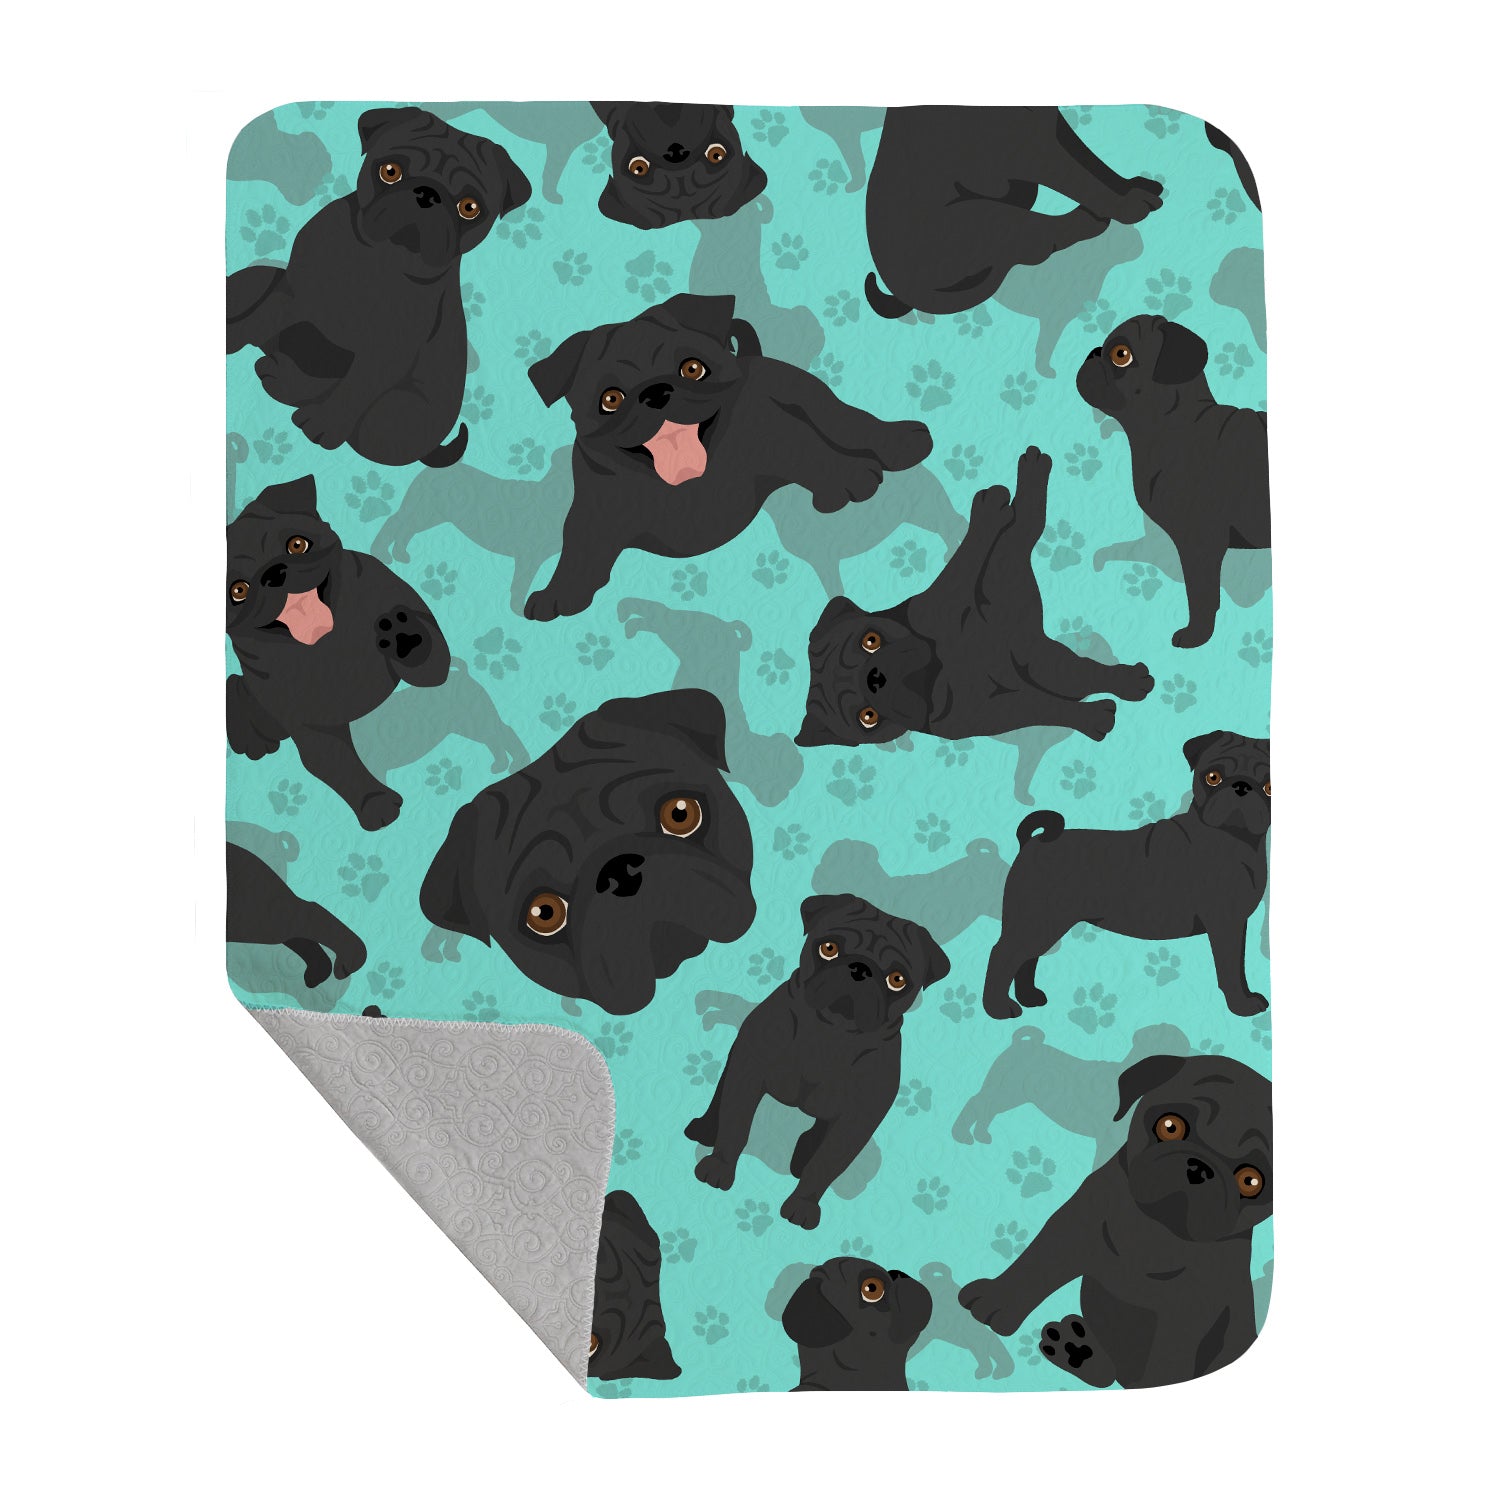 Buy this Black Pug Quilted Blanket 50x60